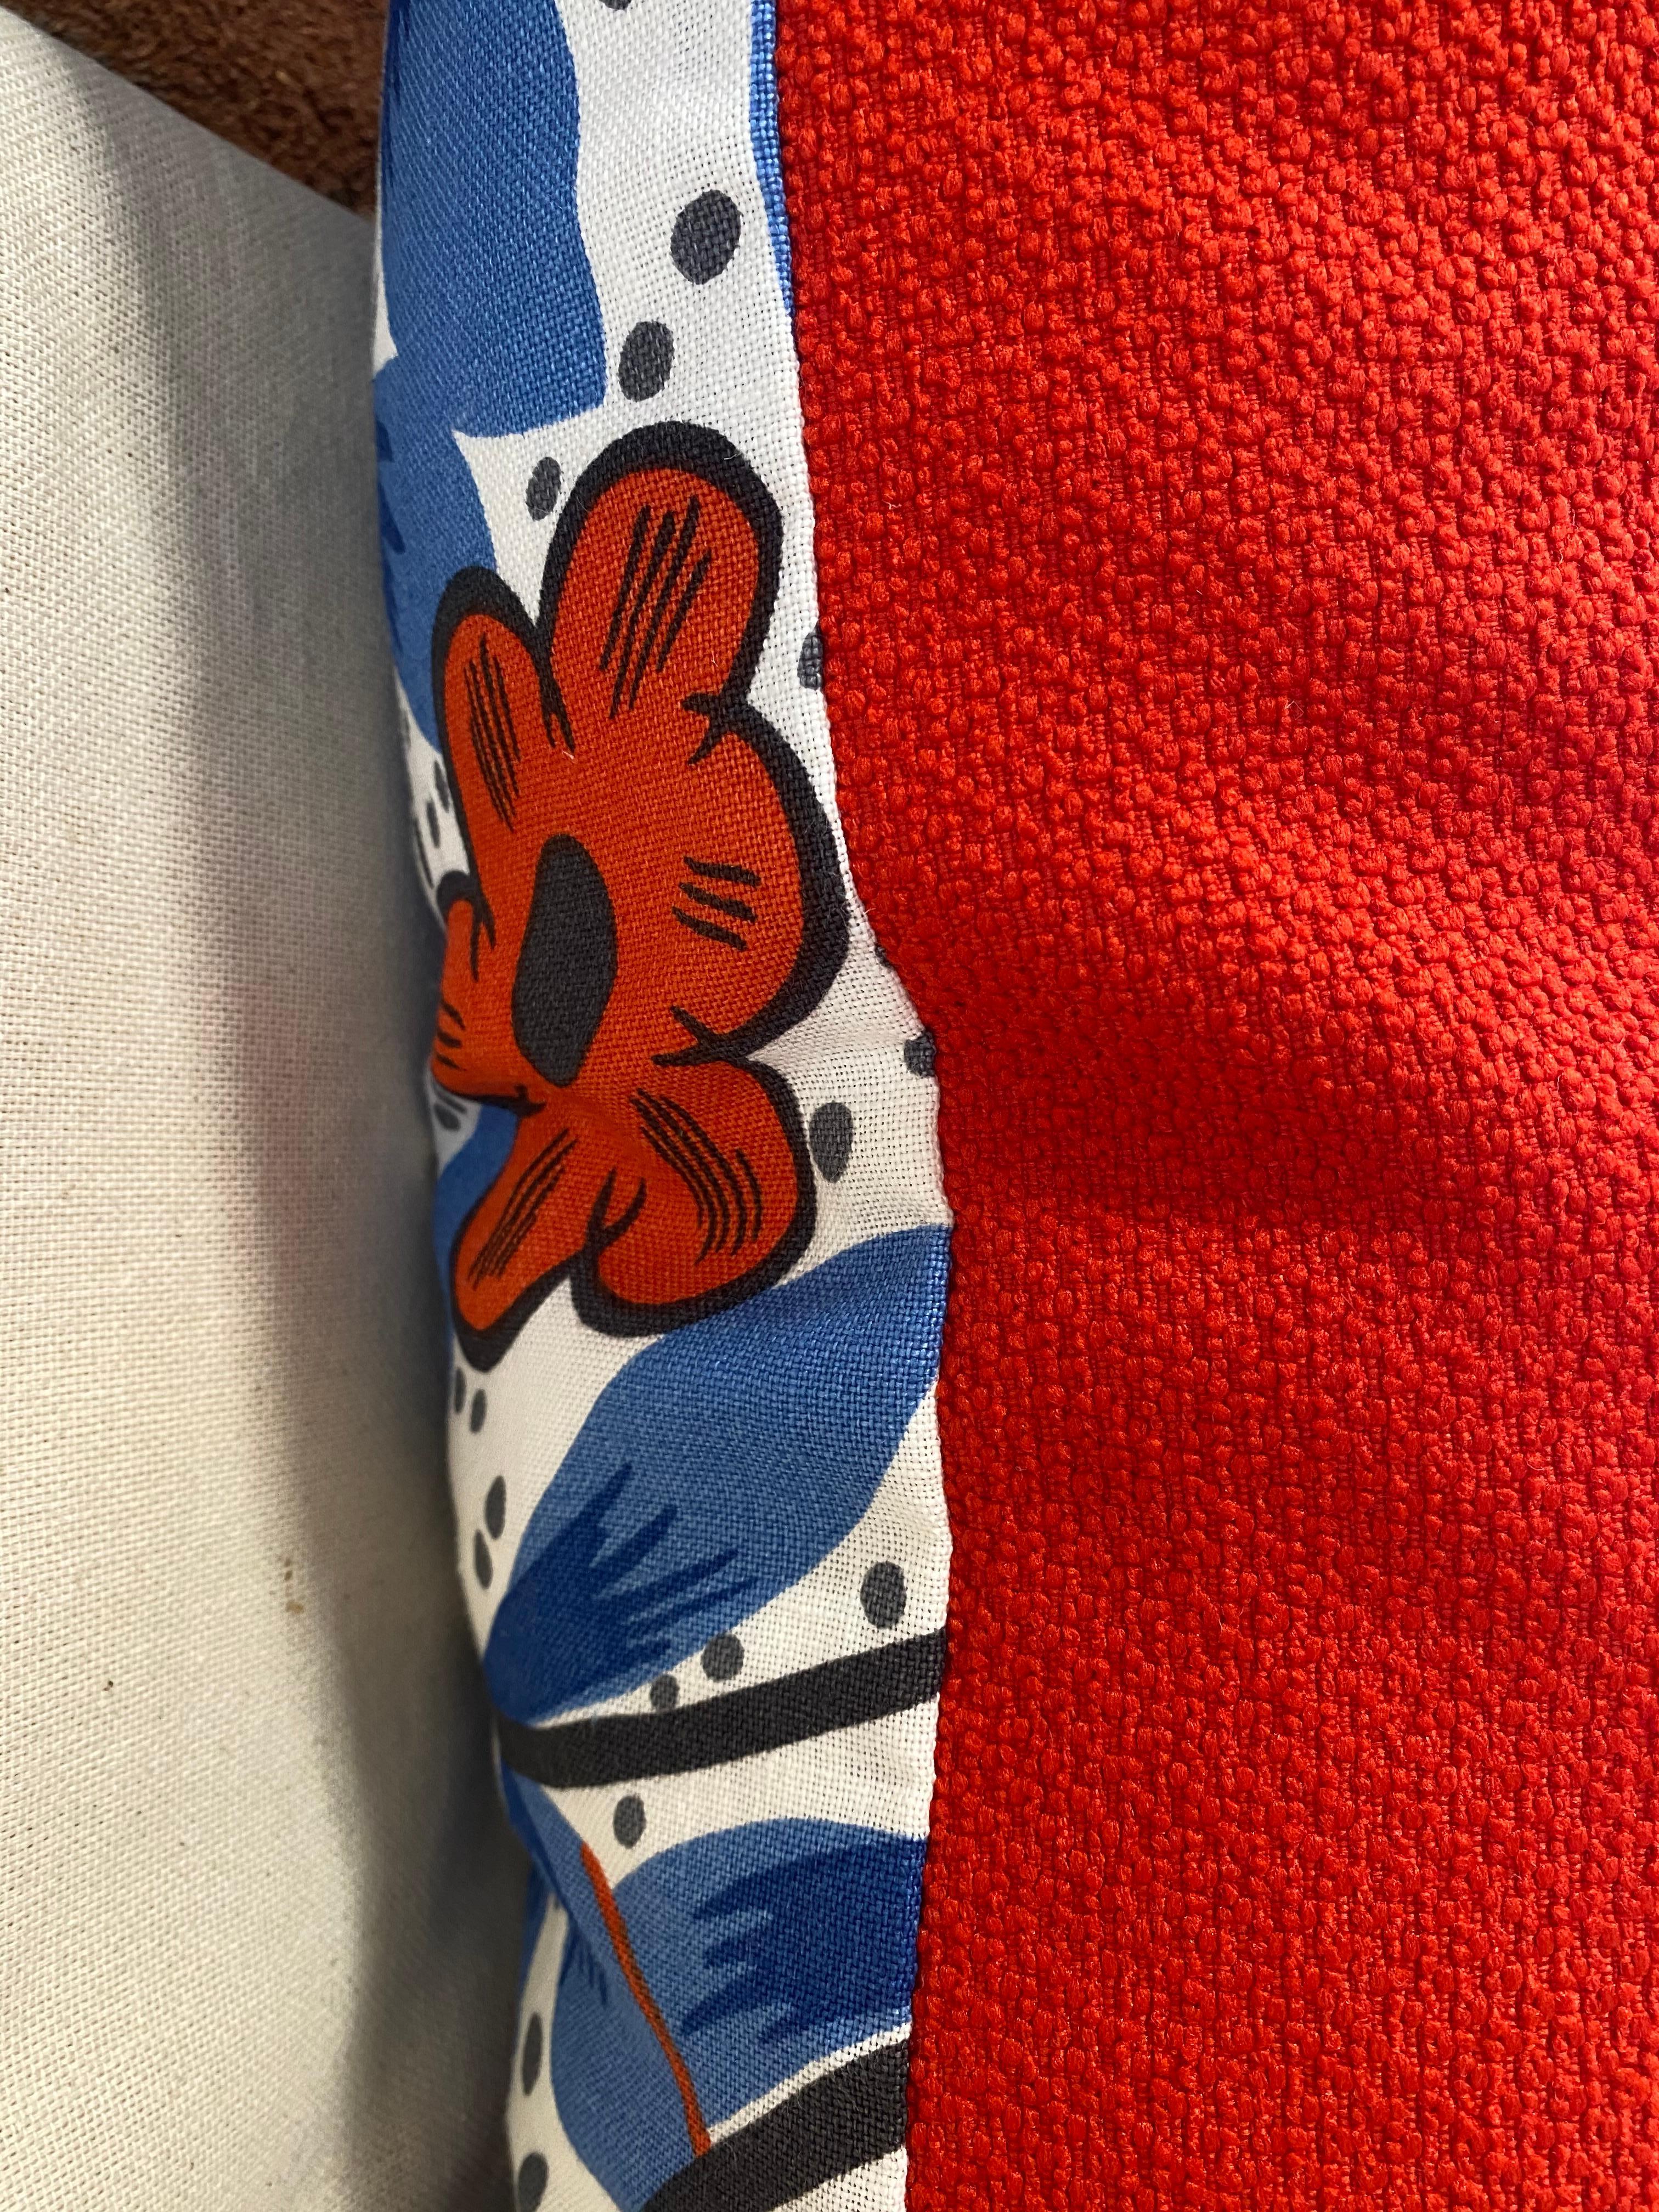 American Red White and Cobalt Blue Cotton Floral Print Mid Century Modern For Sale